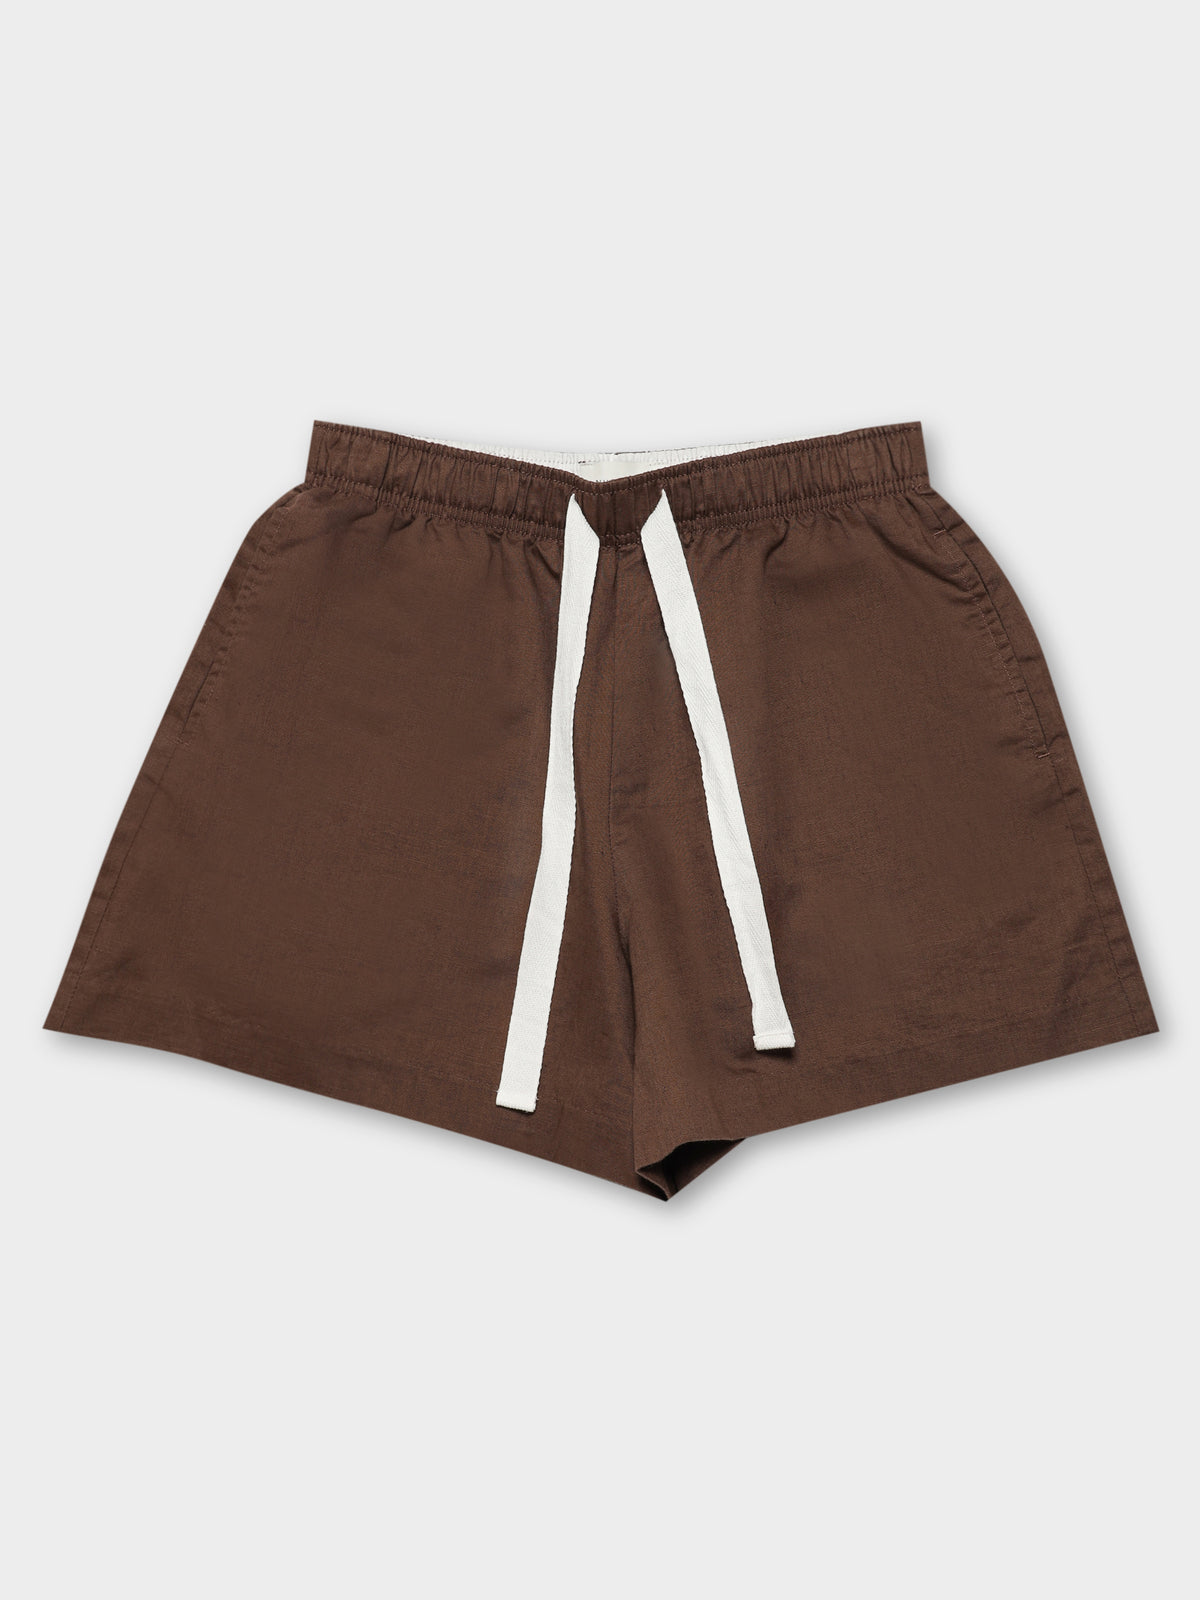 Classic Linen Shorts in Chocolate